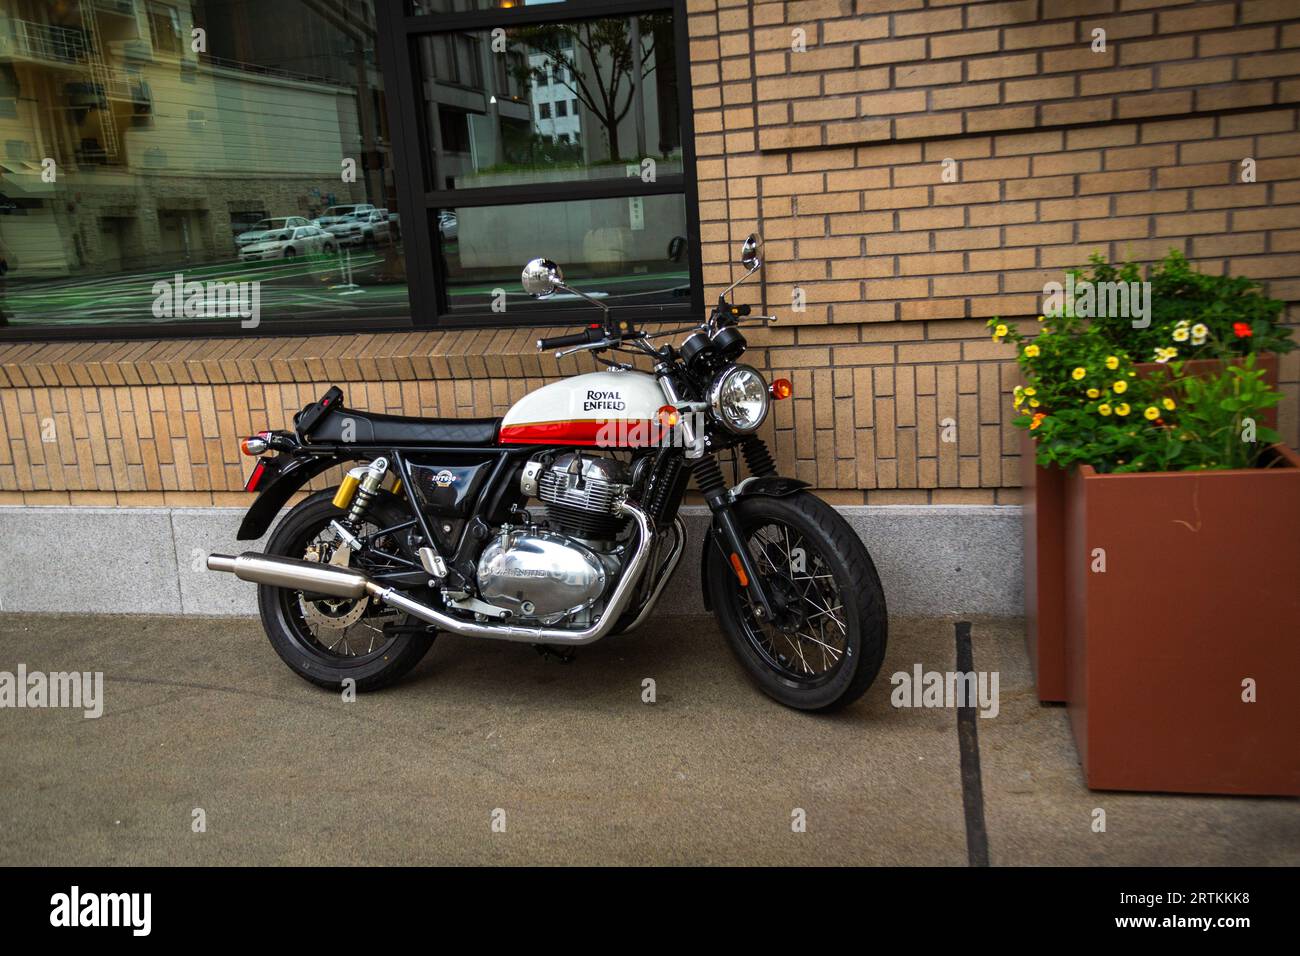 Royal Enfield motorcycle parked in front of a hotel in downtown Portland Oregon Stock Photo